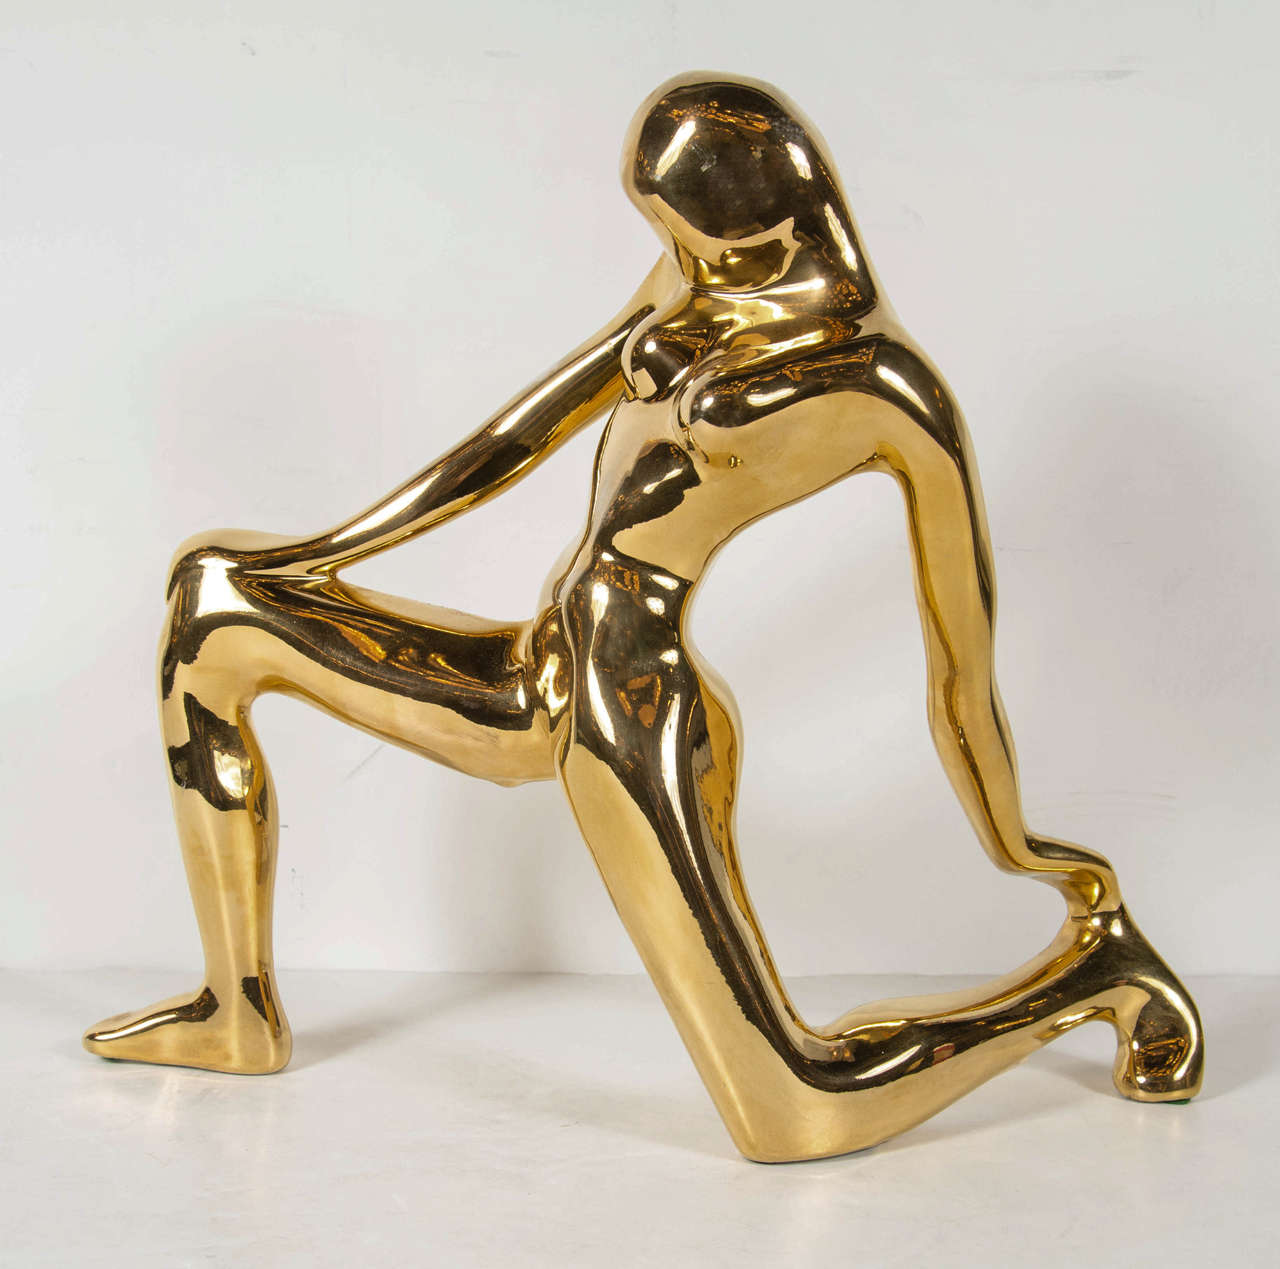 This gold-plated ceramic sculpture features a stylized kneeling woman in Cubist form. It bears the signature Jaru on the bottom.